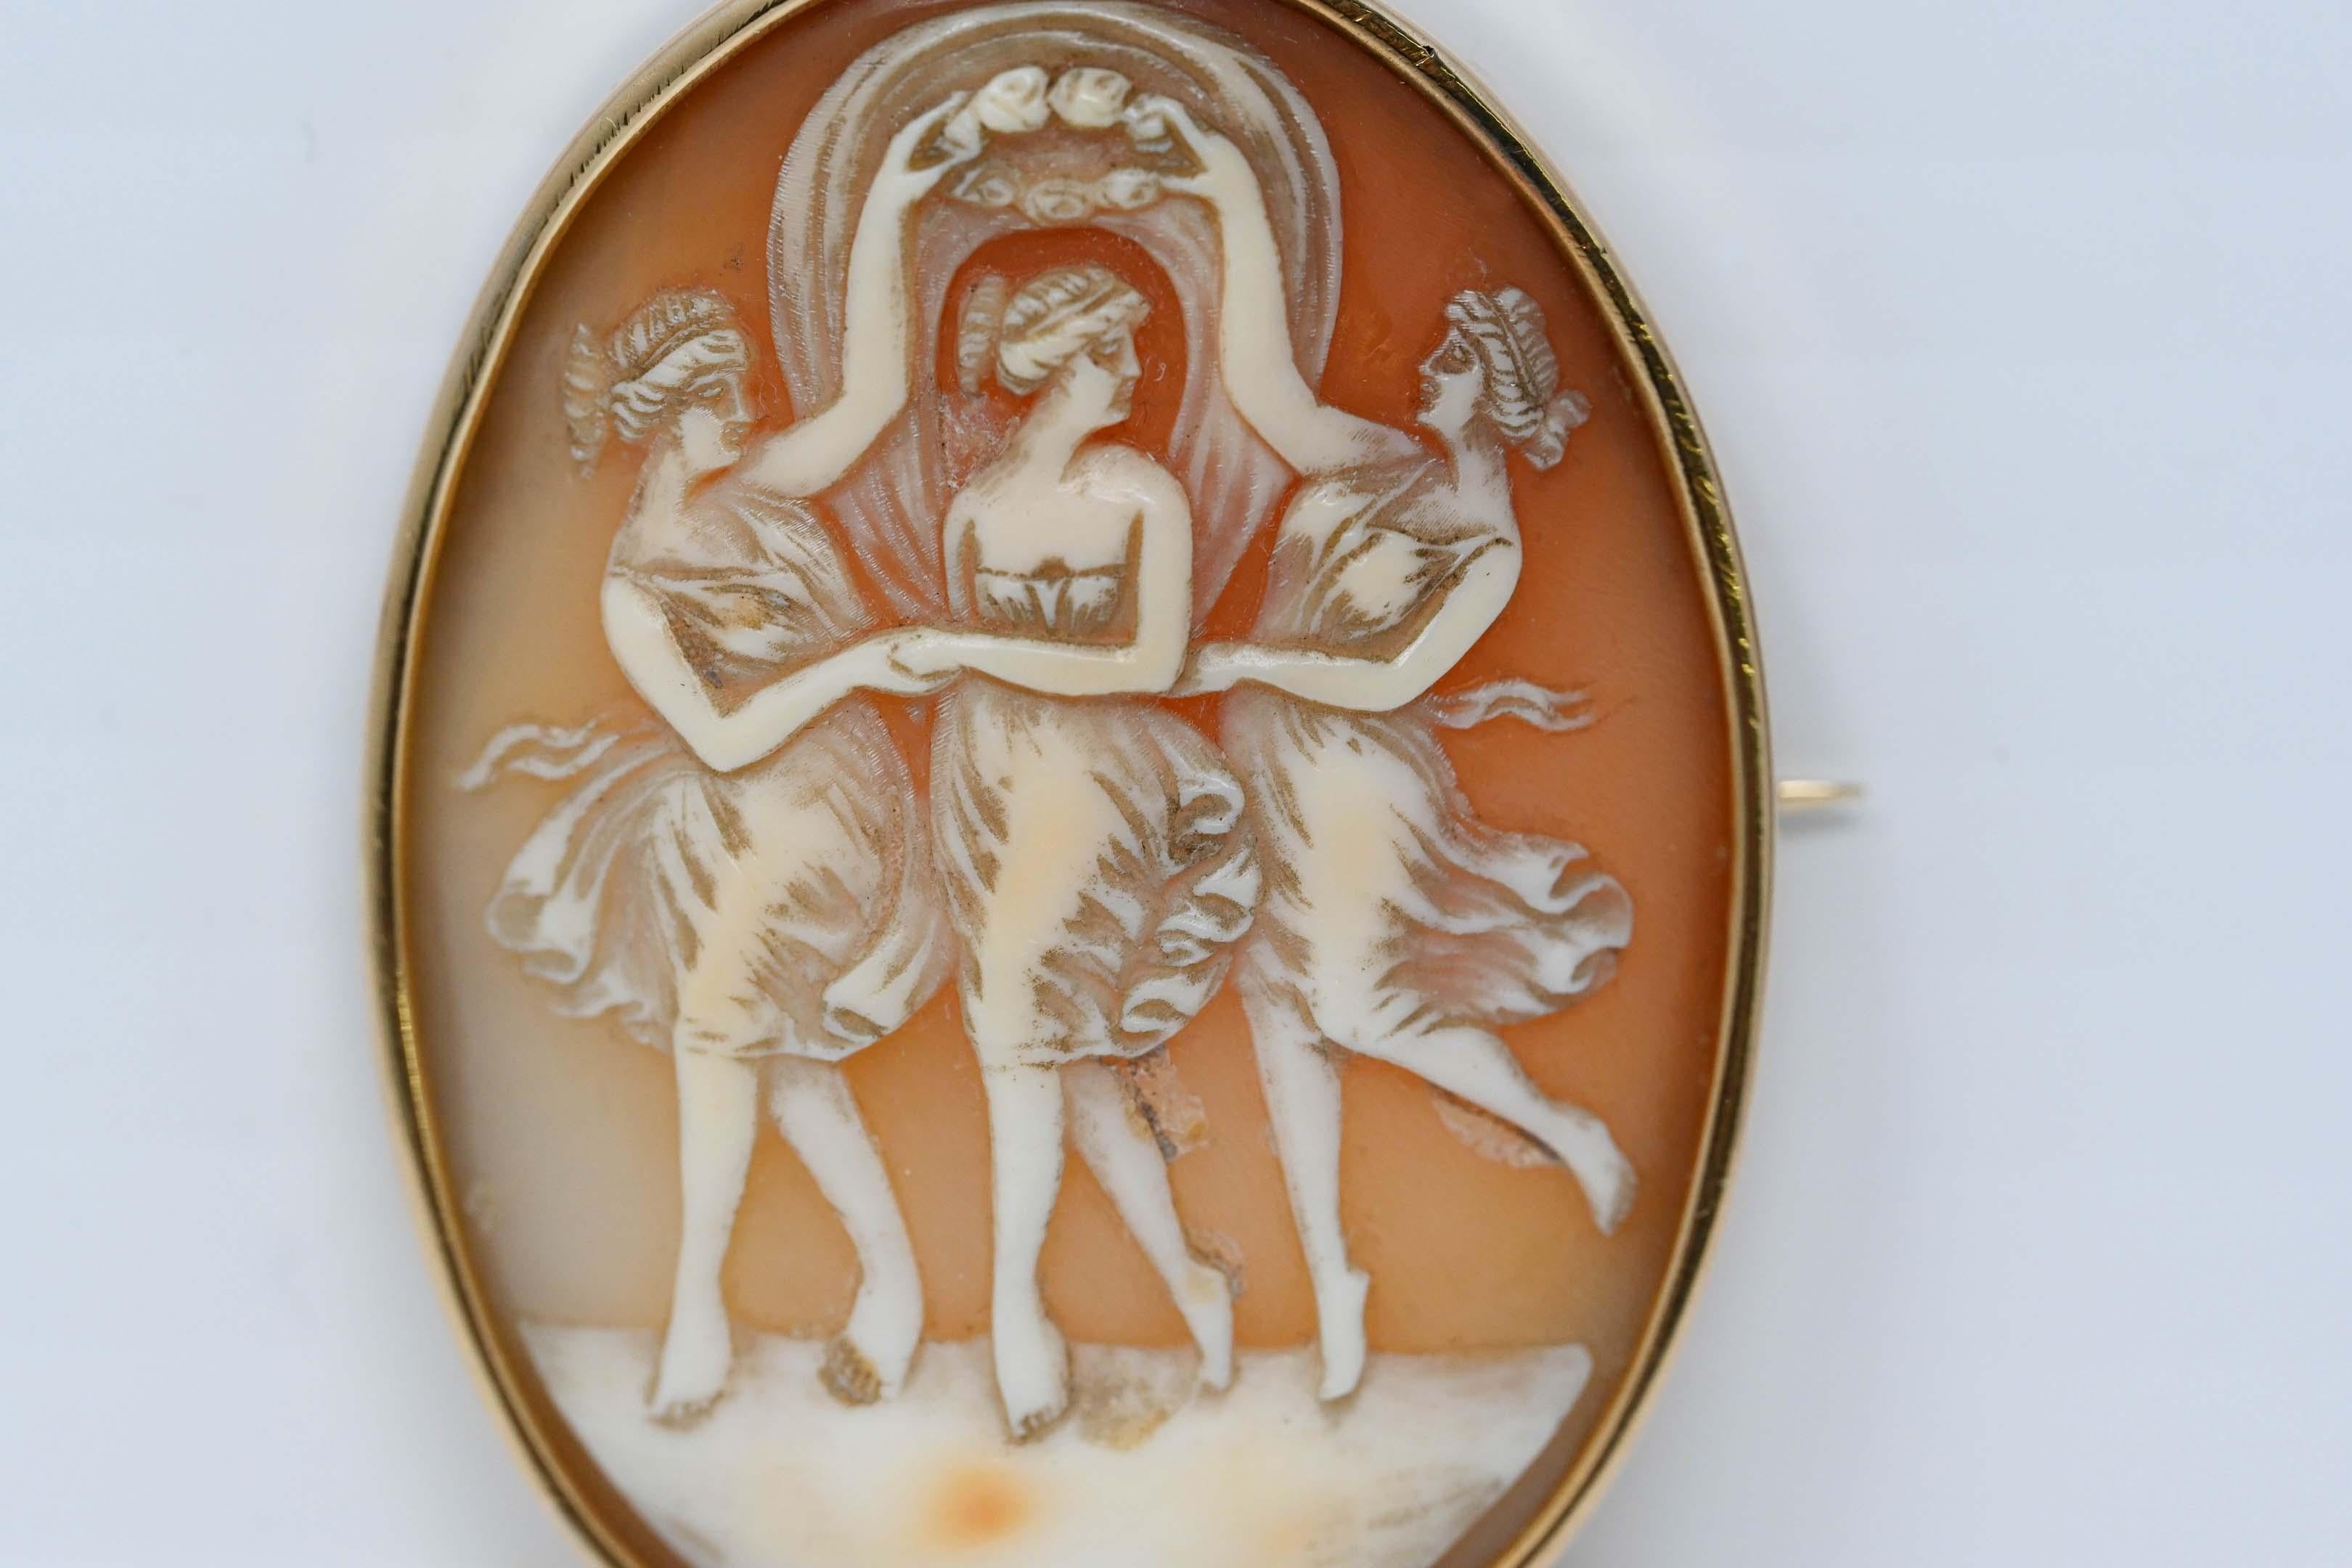 Antique 18k yellow gold cameo carving of The Three Graces. Measures 2 inches x 1 1/2 inches no mark, 13.2 grams. In good condition, apart from minor tarnish on the back.